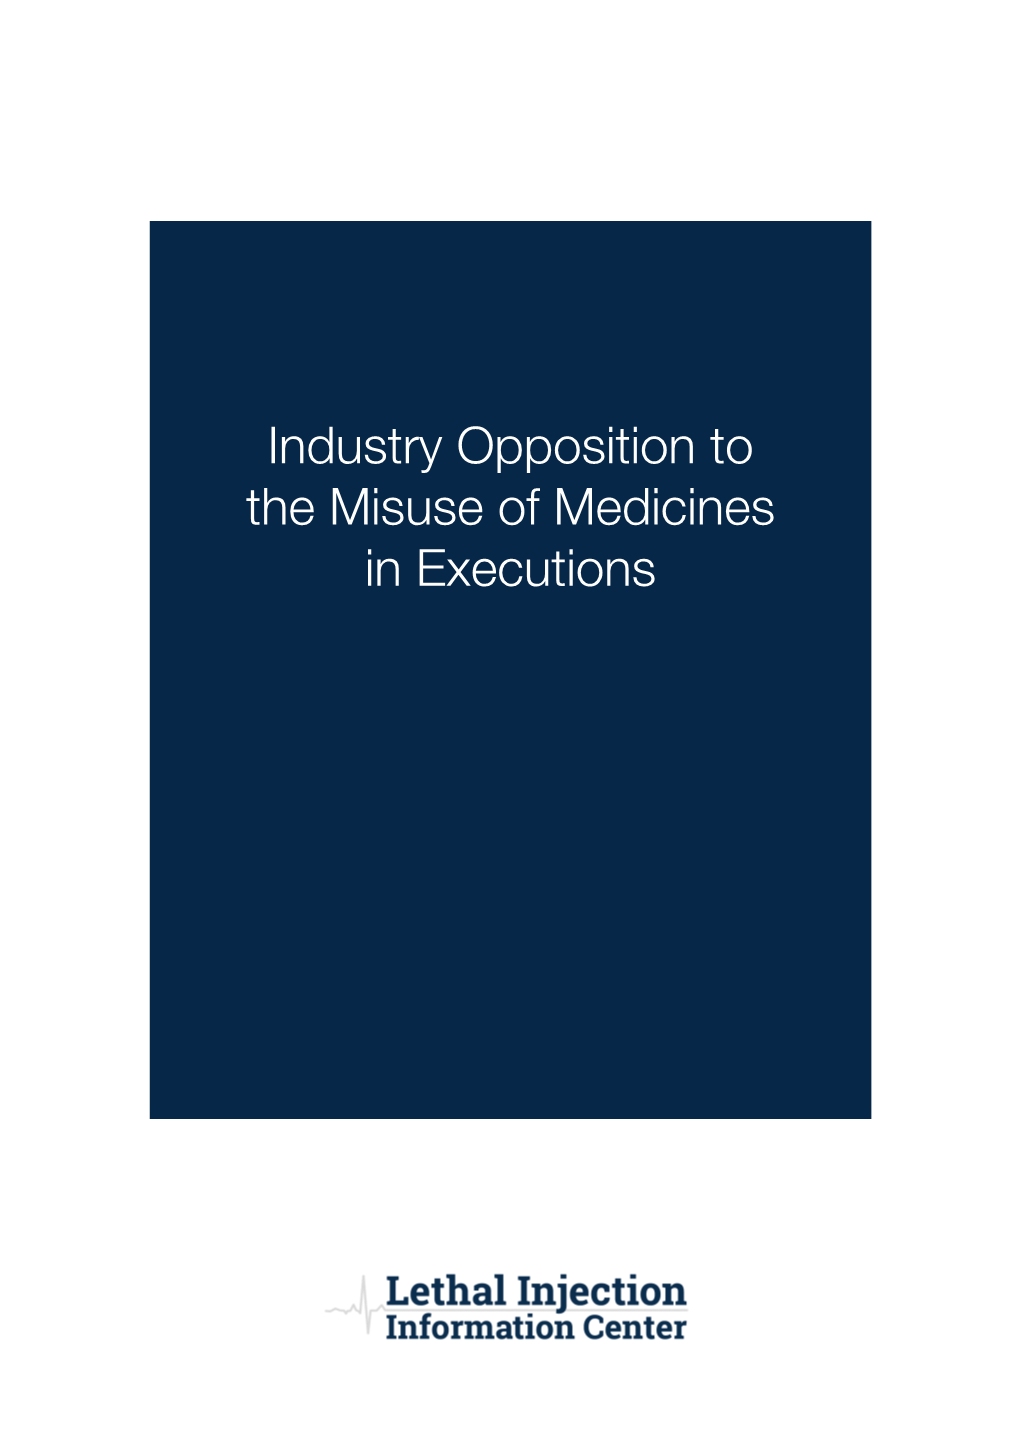 Industry Opposition to the Misuse of Medicines in Executions Industry Opposition to the Misuse of Medicines in Executions